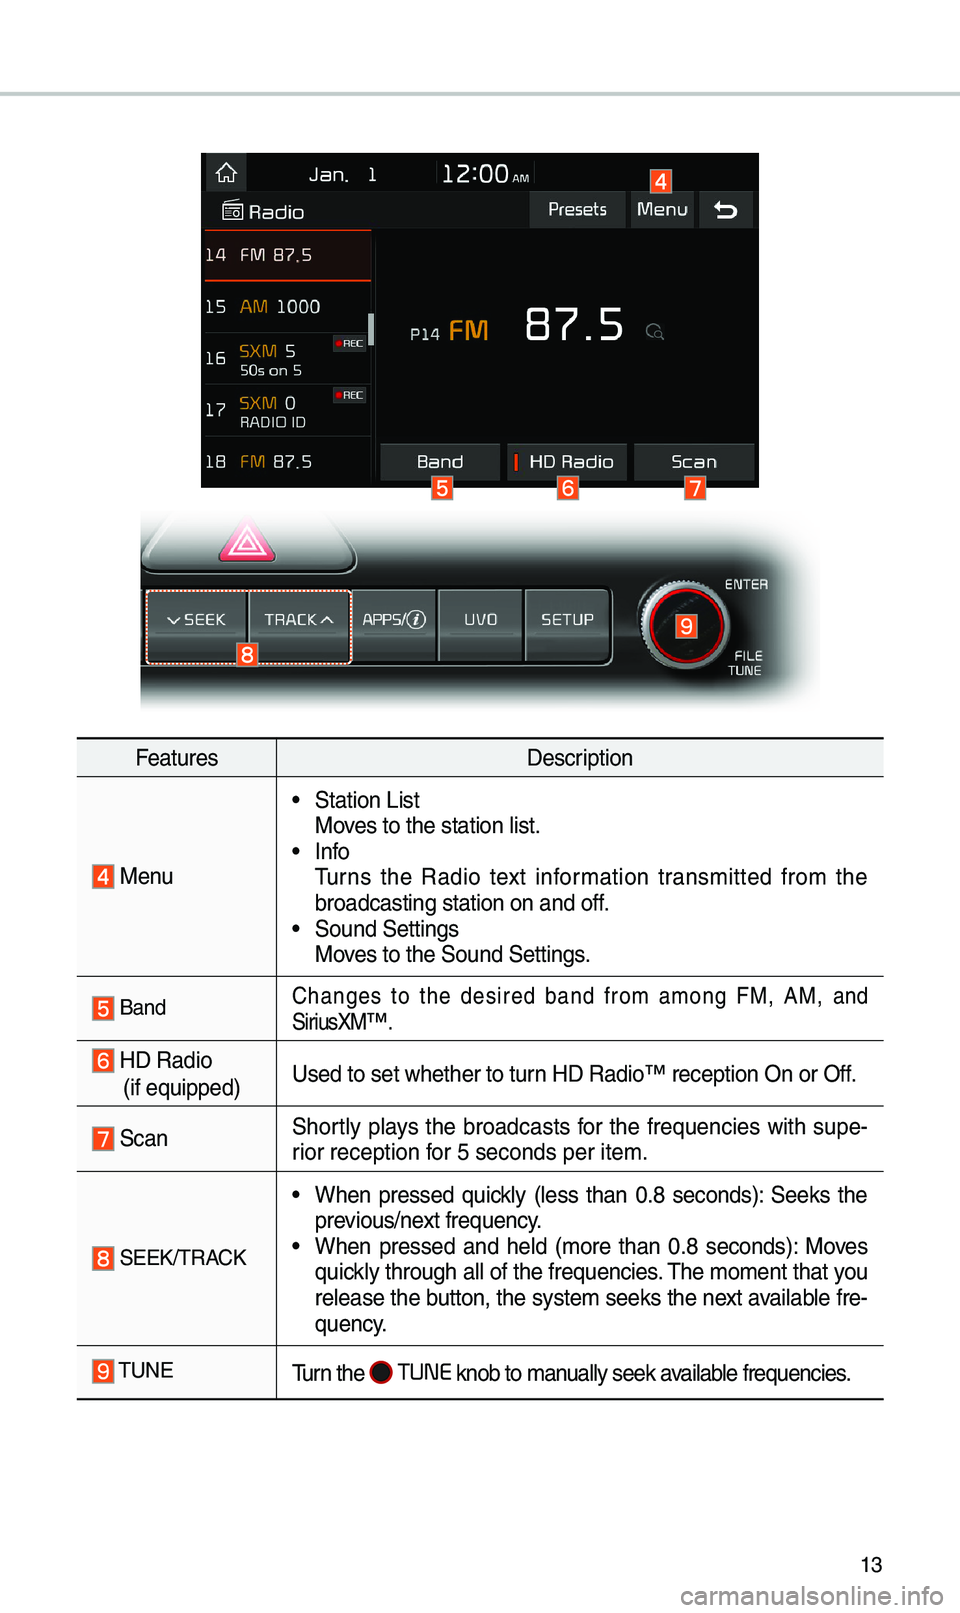 KIA SPORTAGE 2019  Quick Reference Guide 13
FeaturesDescription
  Menu
 •Station List
Moves to t\be station l\iist.
 •Info
Turns  t\be  Radio  text  information  transmitted  from  t\be 
broadcasting statio\in on and off.
 •Sound Setti